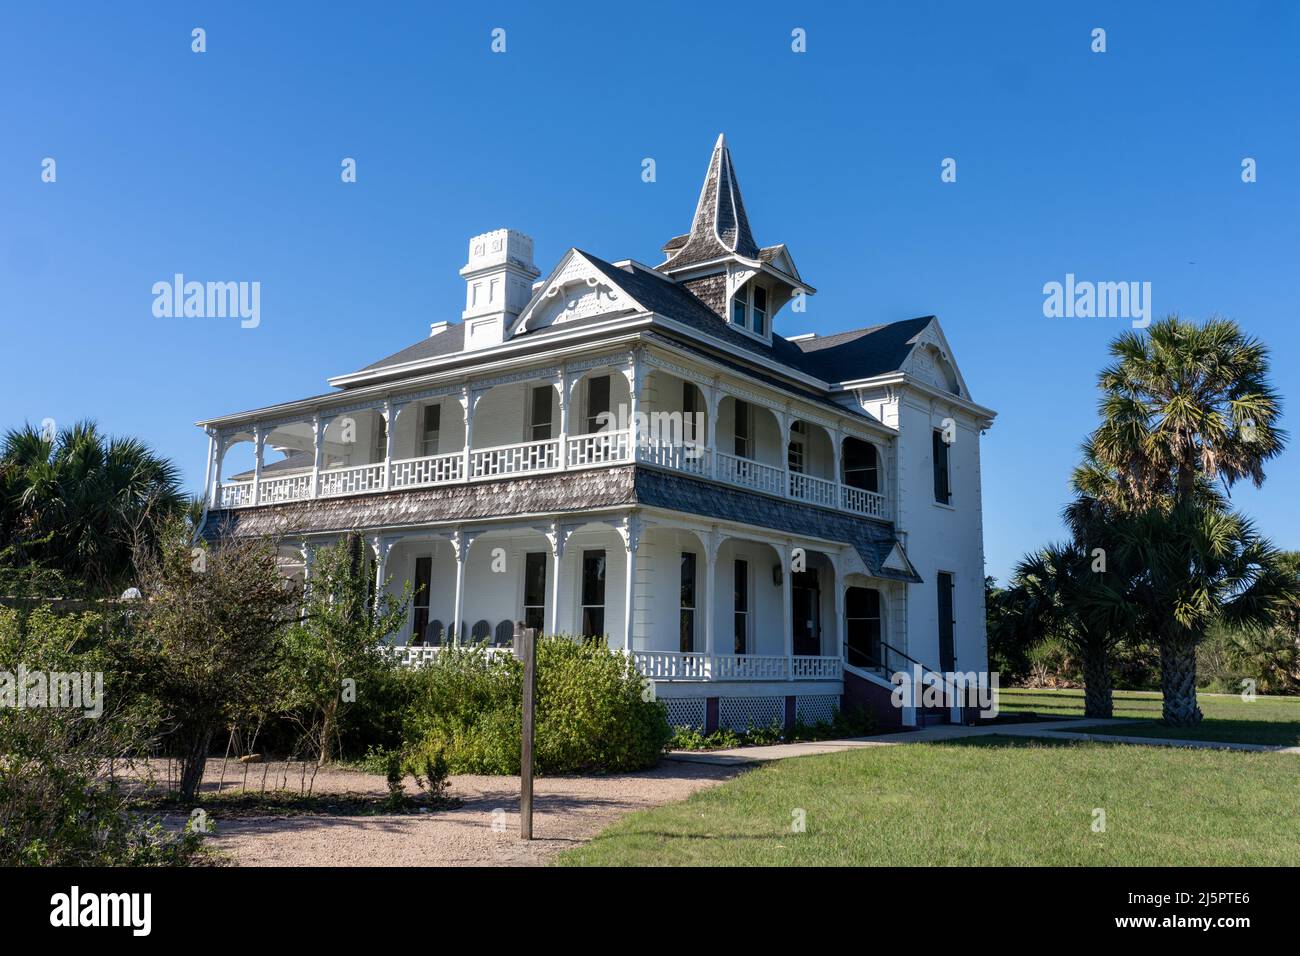 The Rabb Mansion, plantation house for the Rabb Plantation and now the visitor center for Sabal Palm Sanctuary, Brownsville, Texas. Stock Photo